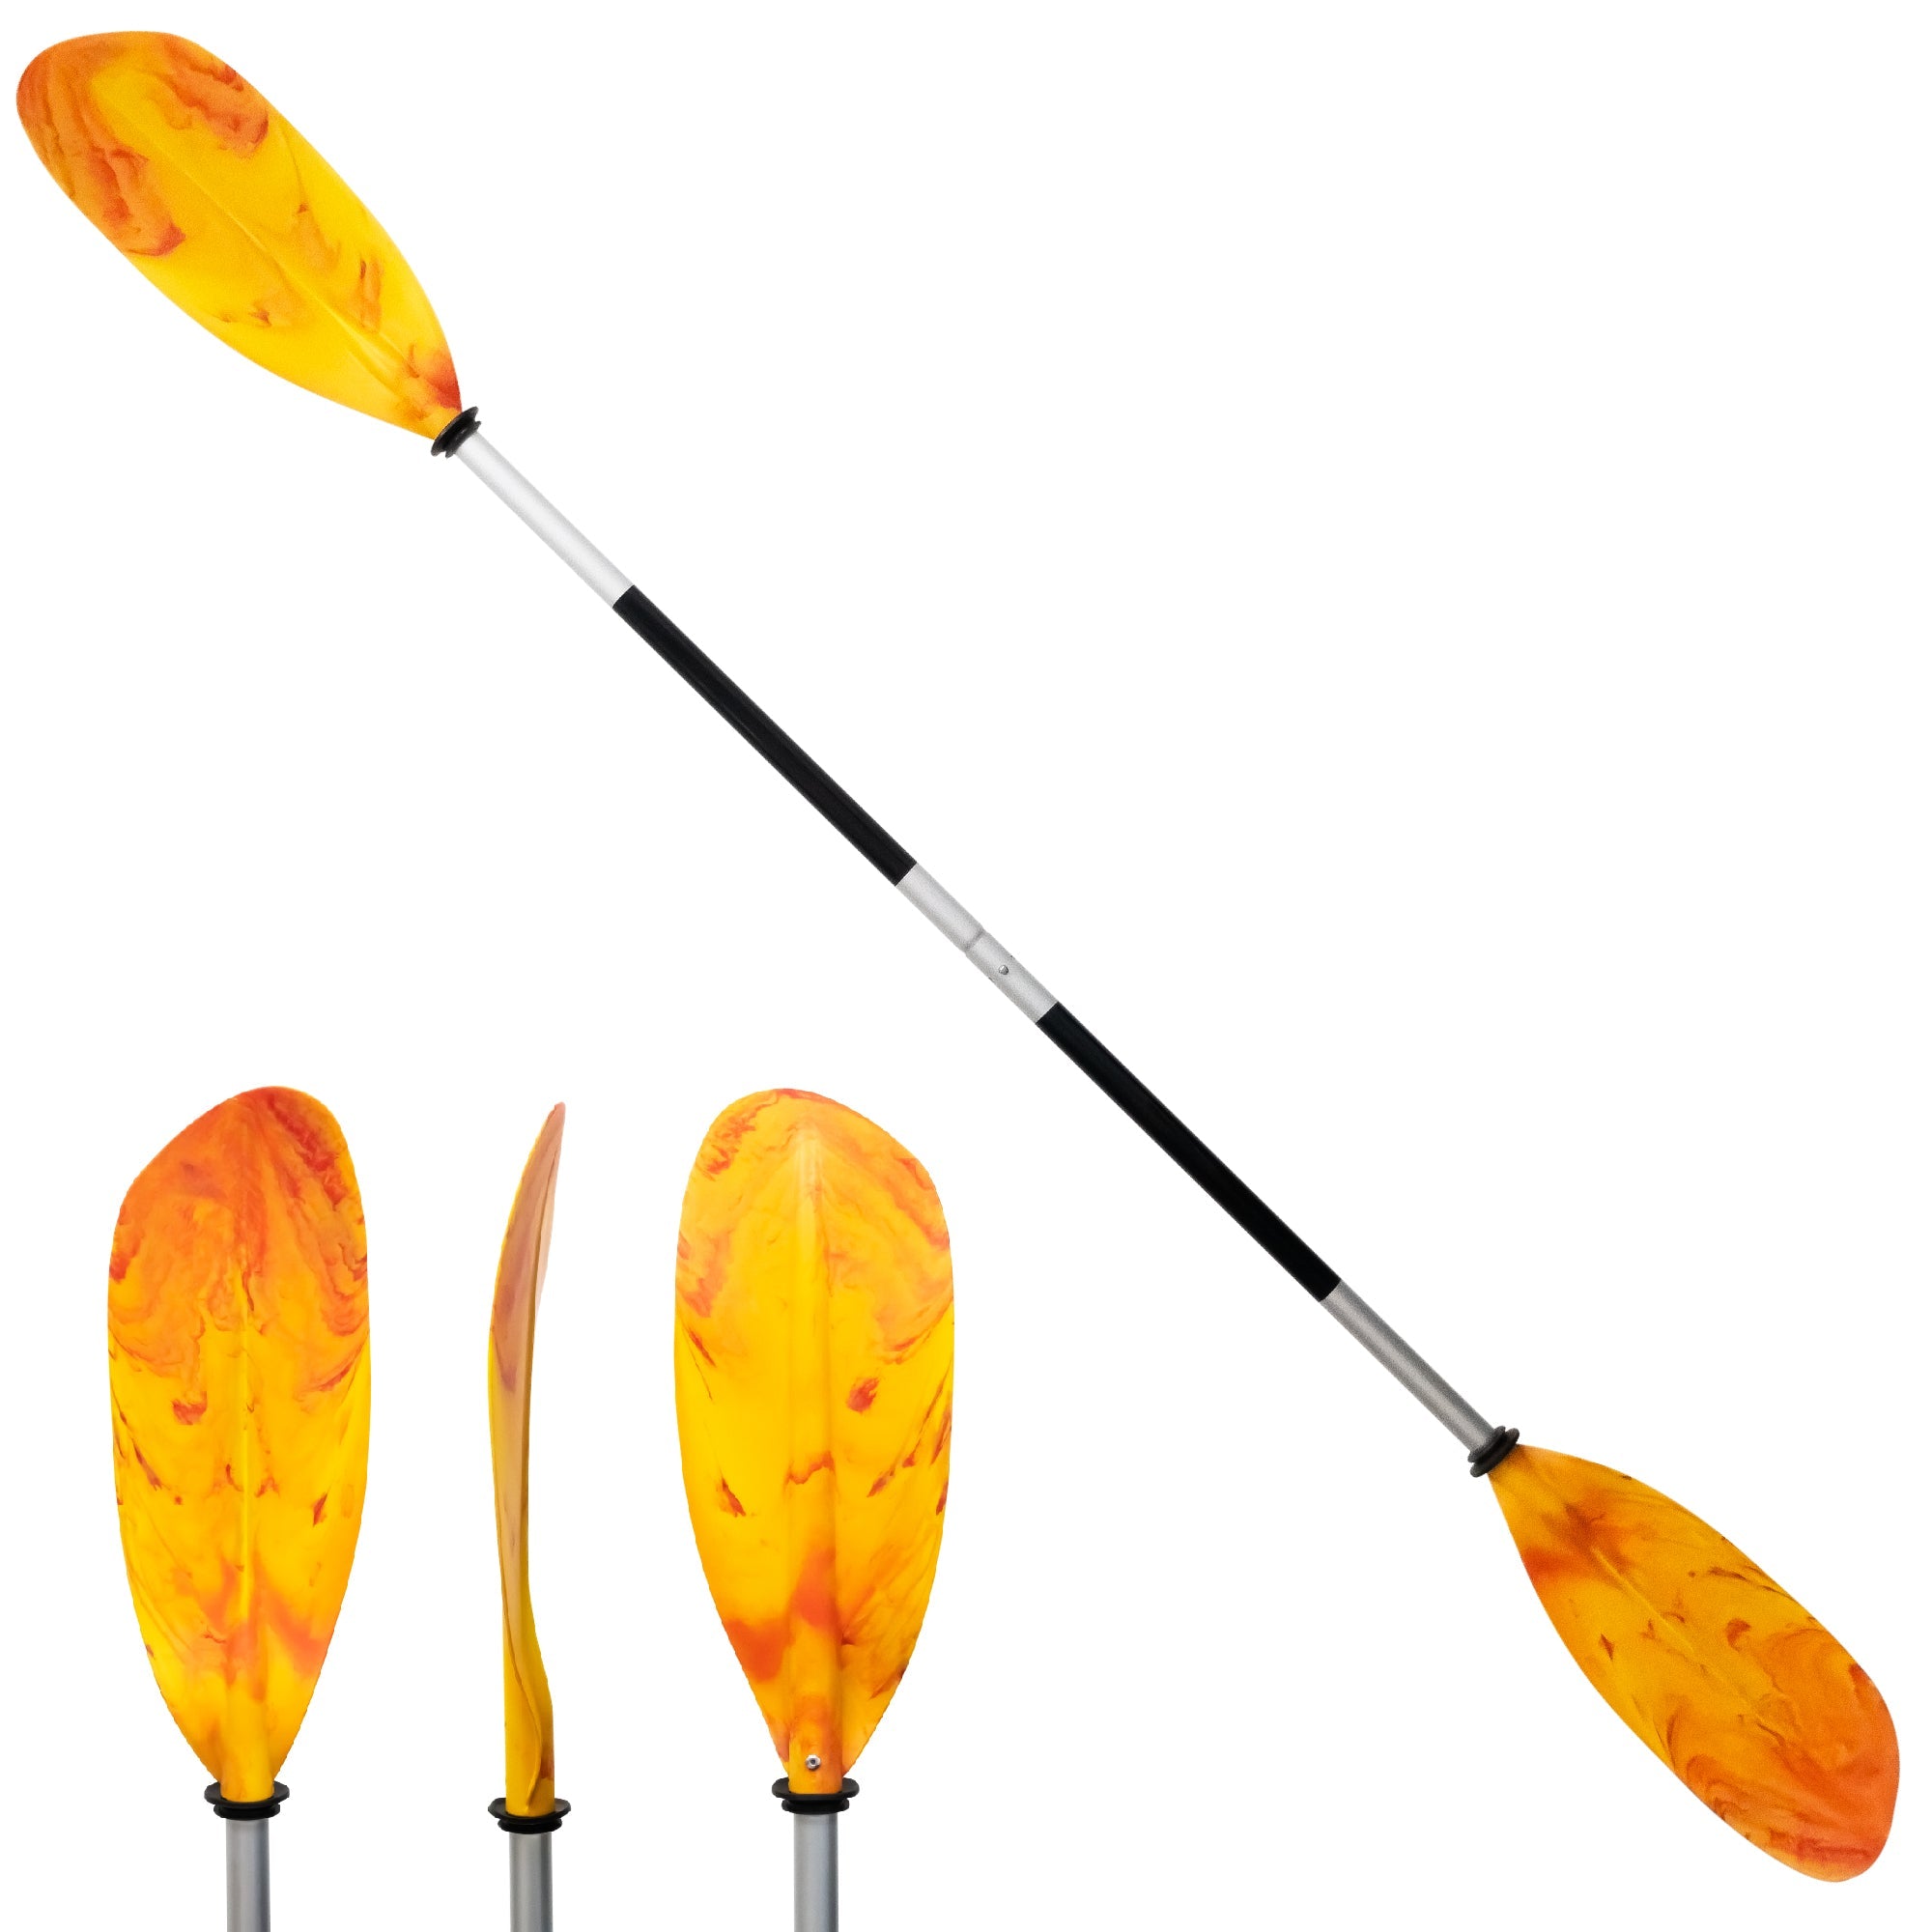 Detachable Kayak Paddle, 84 inches (7ft), Strong Aluminum Shaft, Reinforced ABS Plastic Blades, Lightweight, Asymmetrical curved blade design-Canadian Marine &amp; Outdoor Equipment